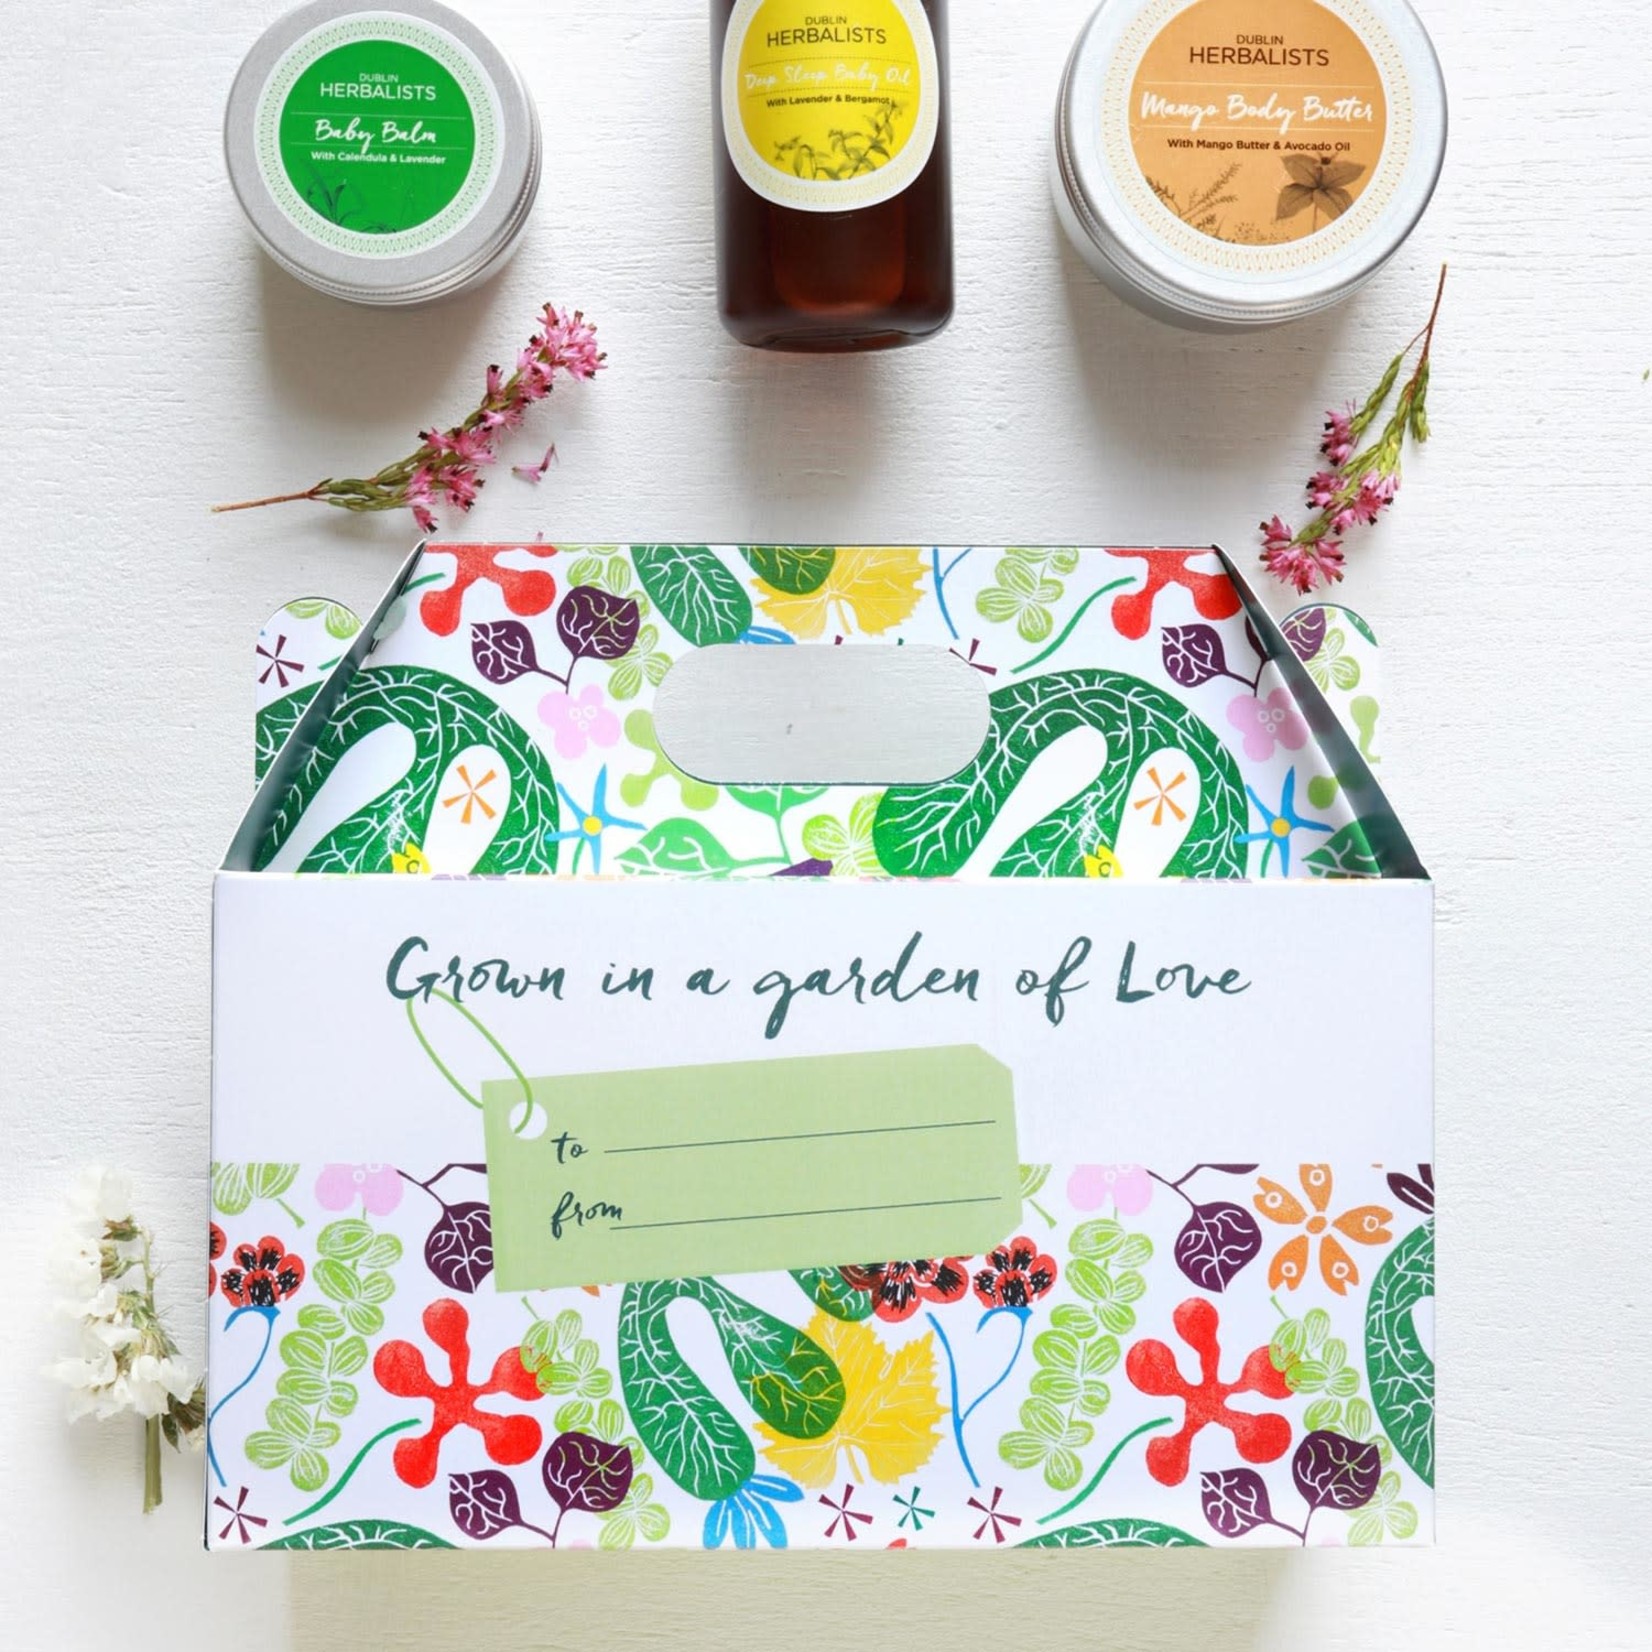 Dublin Herbalists New Baby Collection Gift Box by Dublin Herbalists